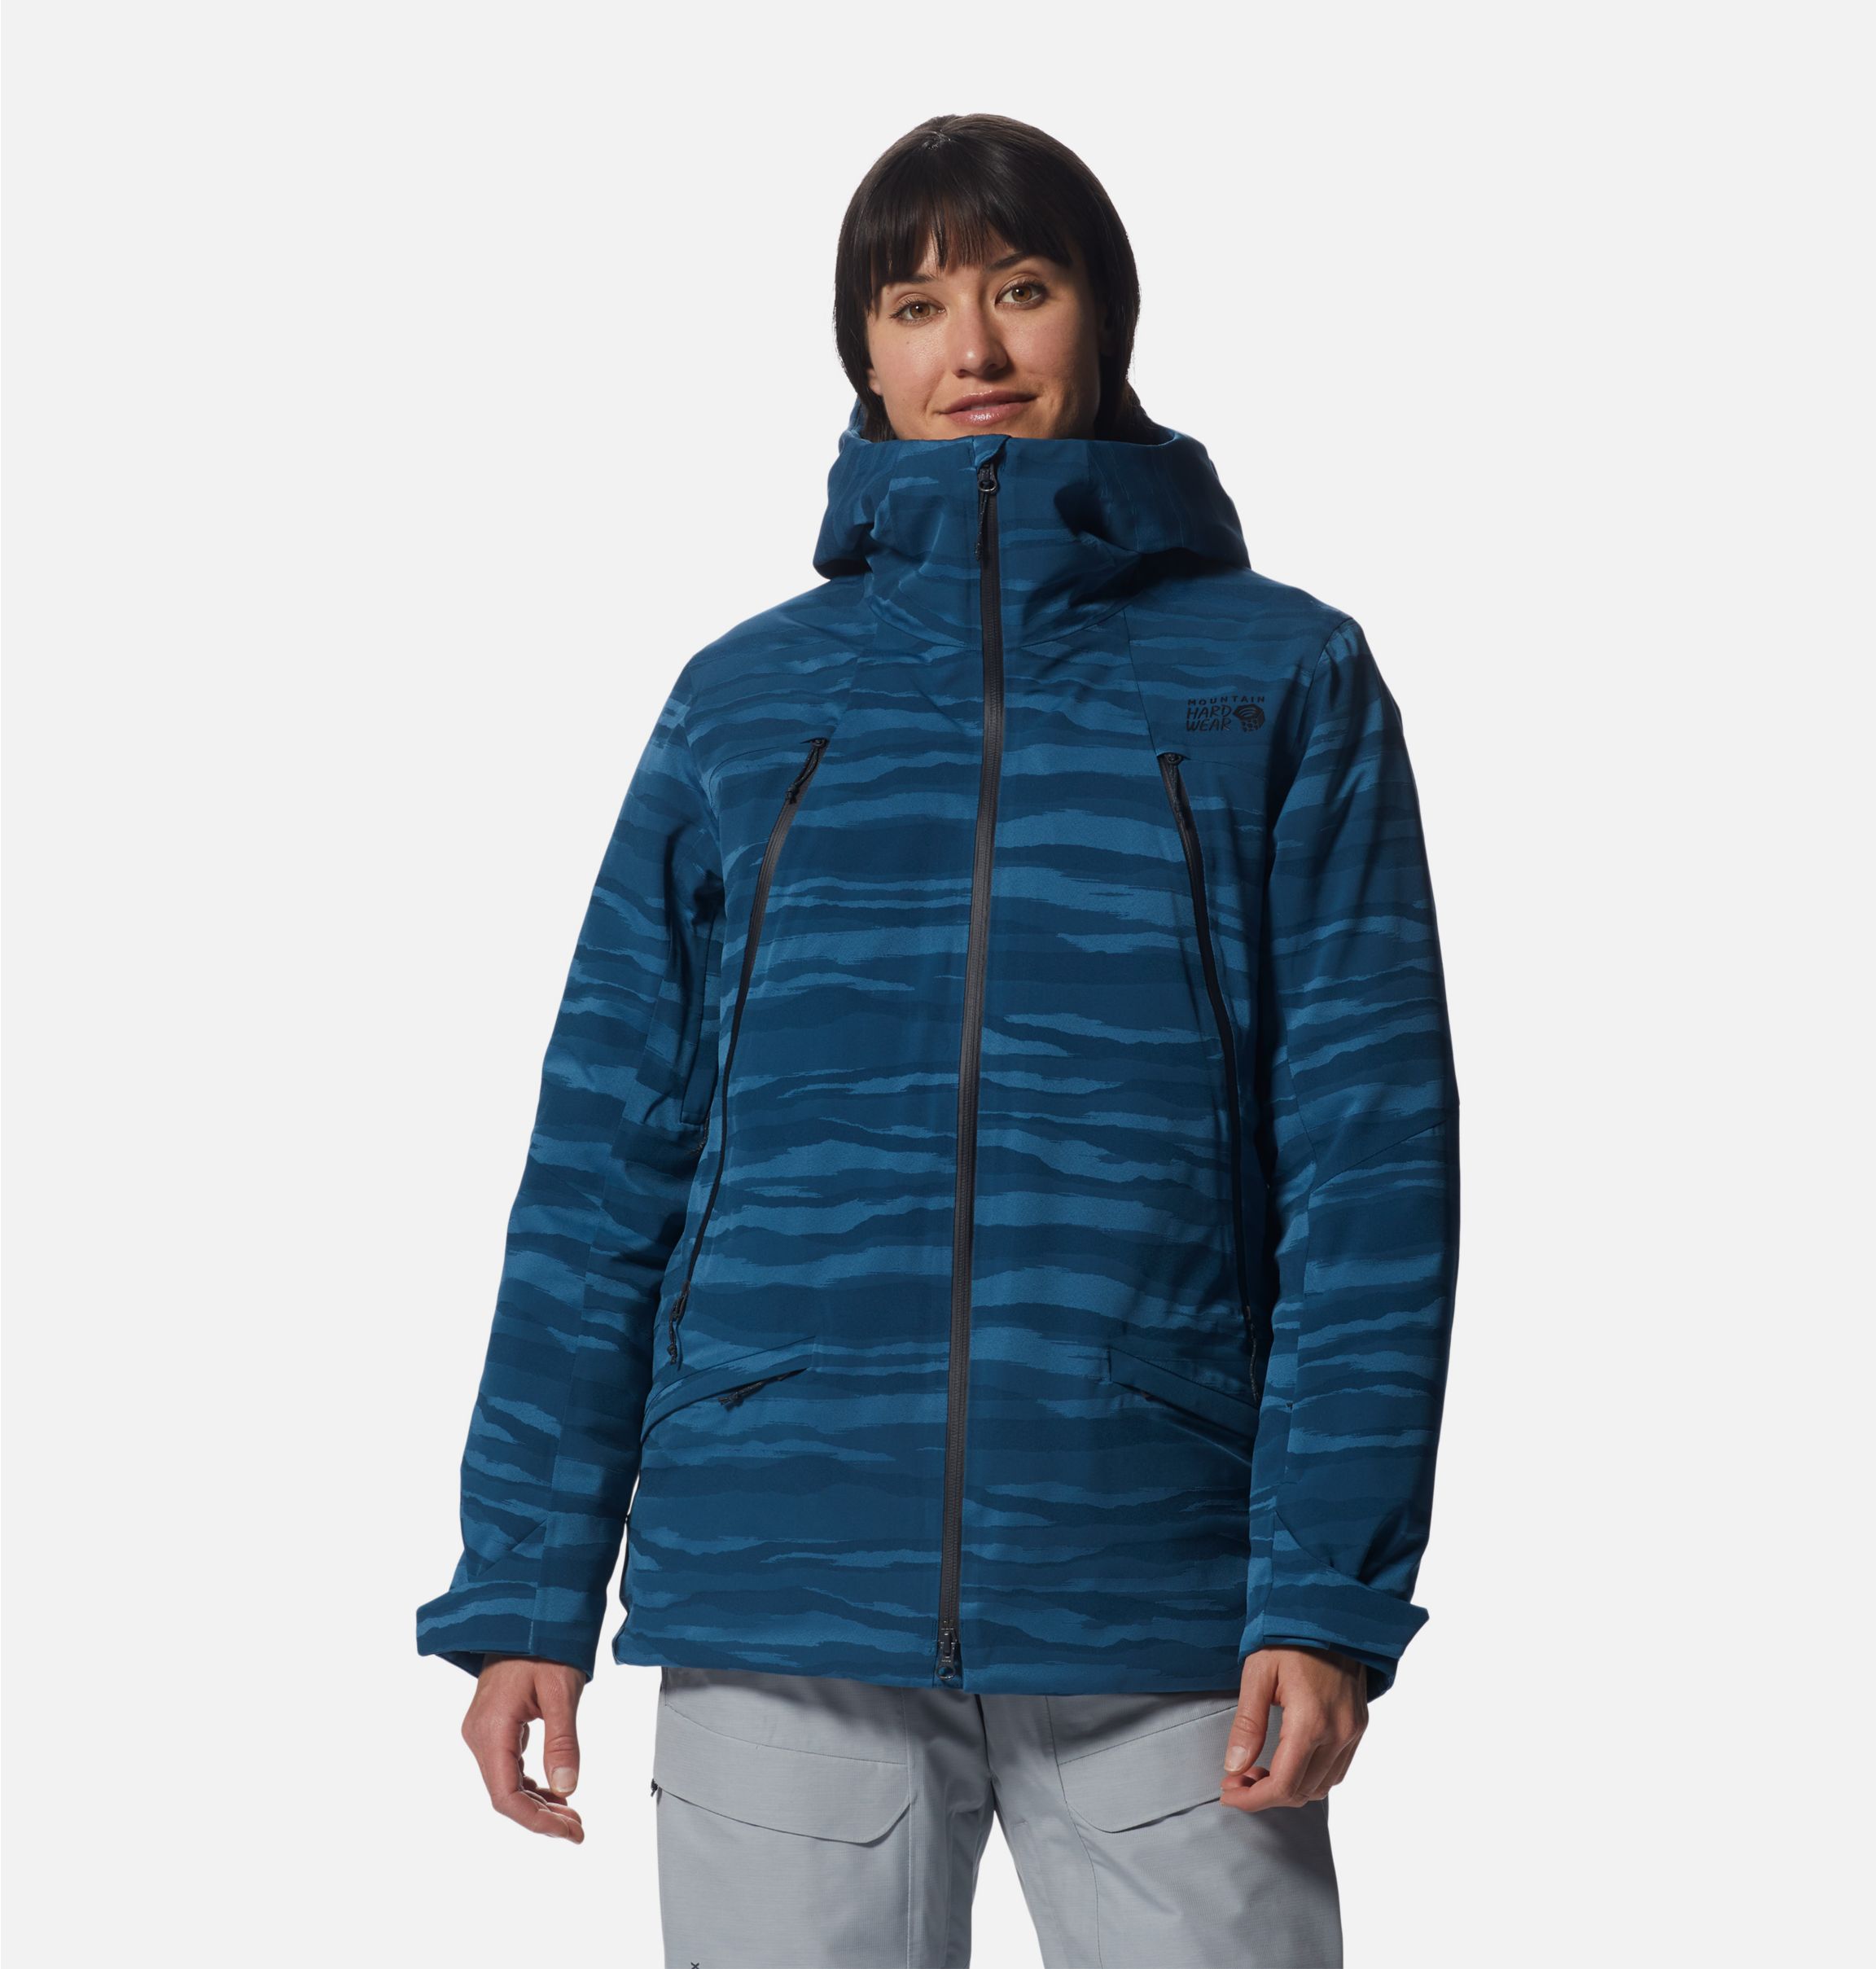 Mountain HardWear - 65% off select apparel with code